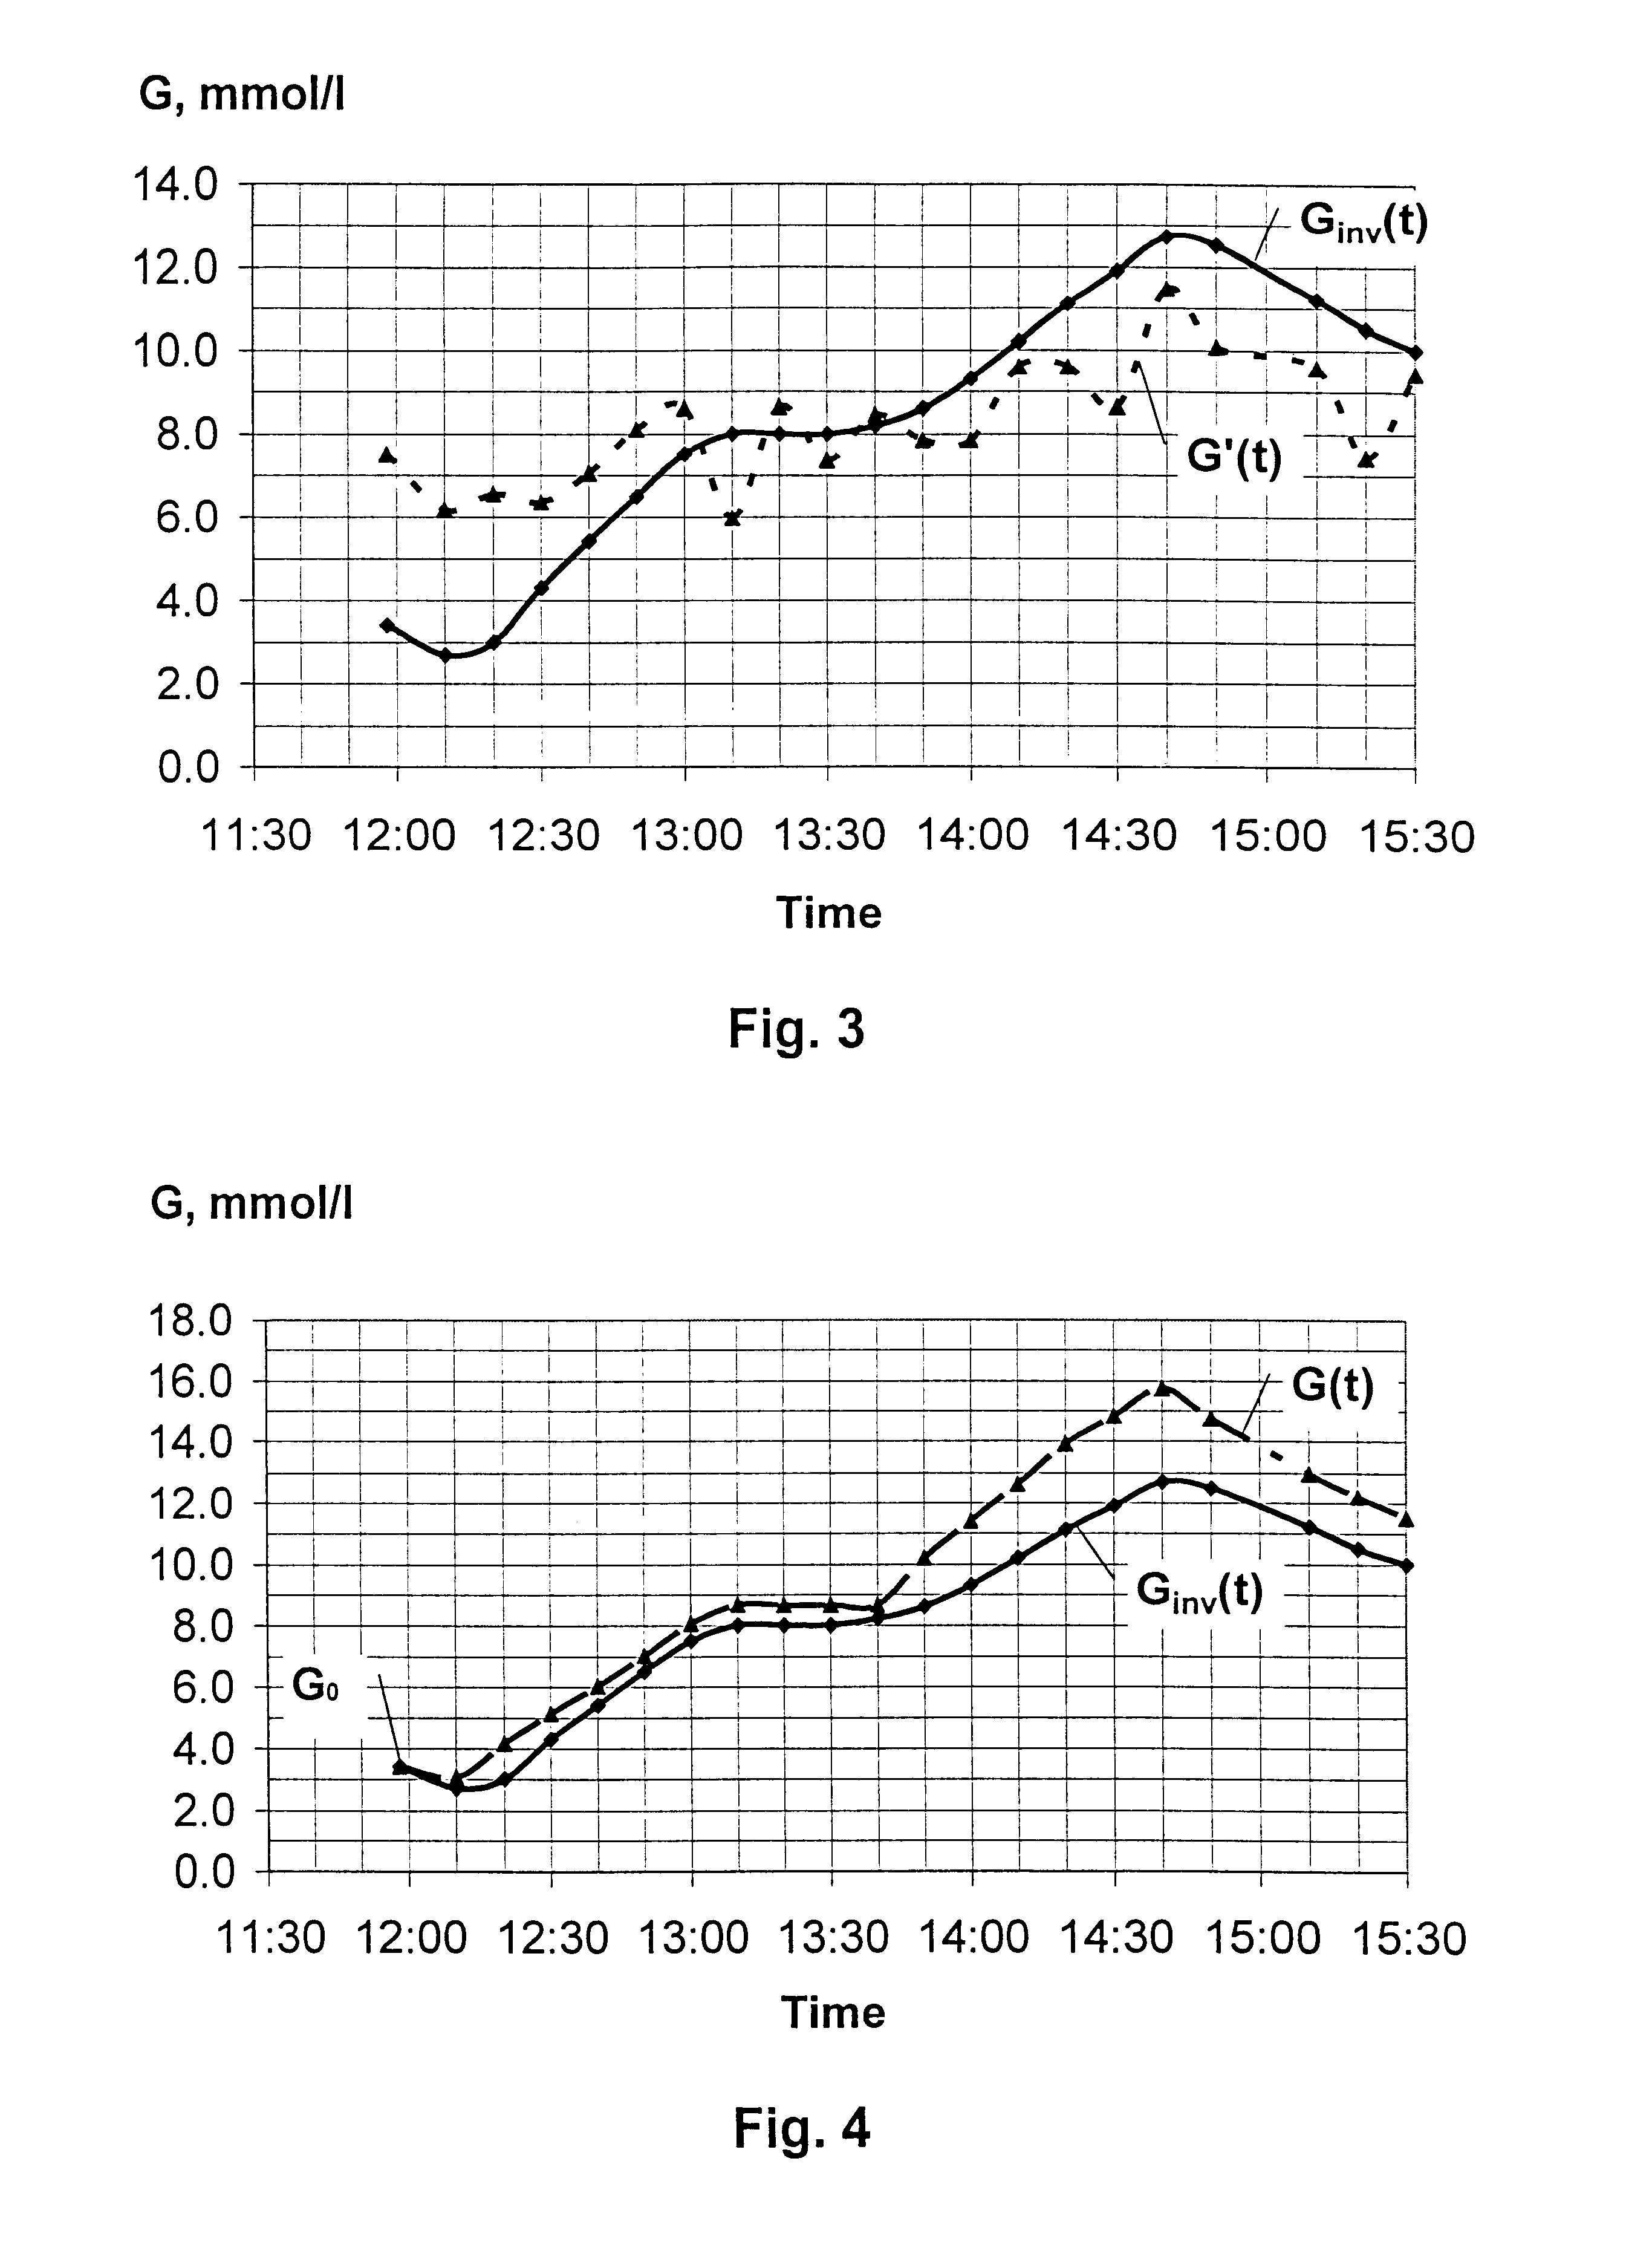 Method of determining concentration of glucose in blood